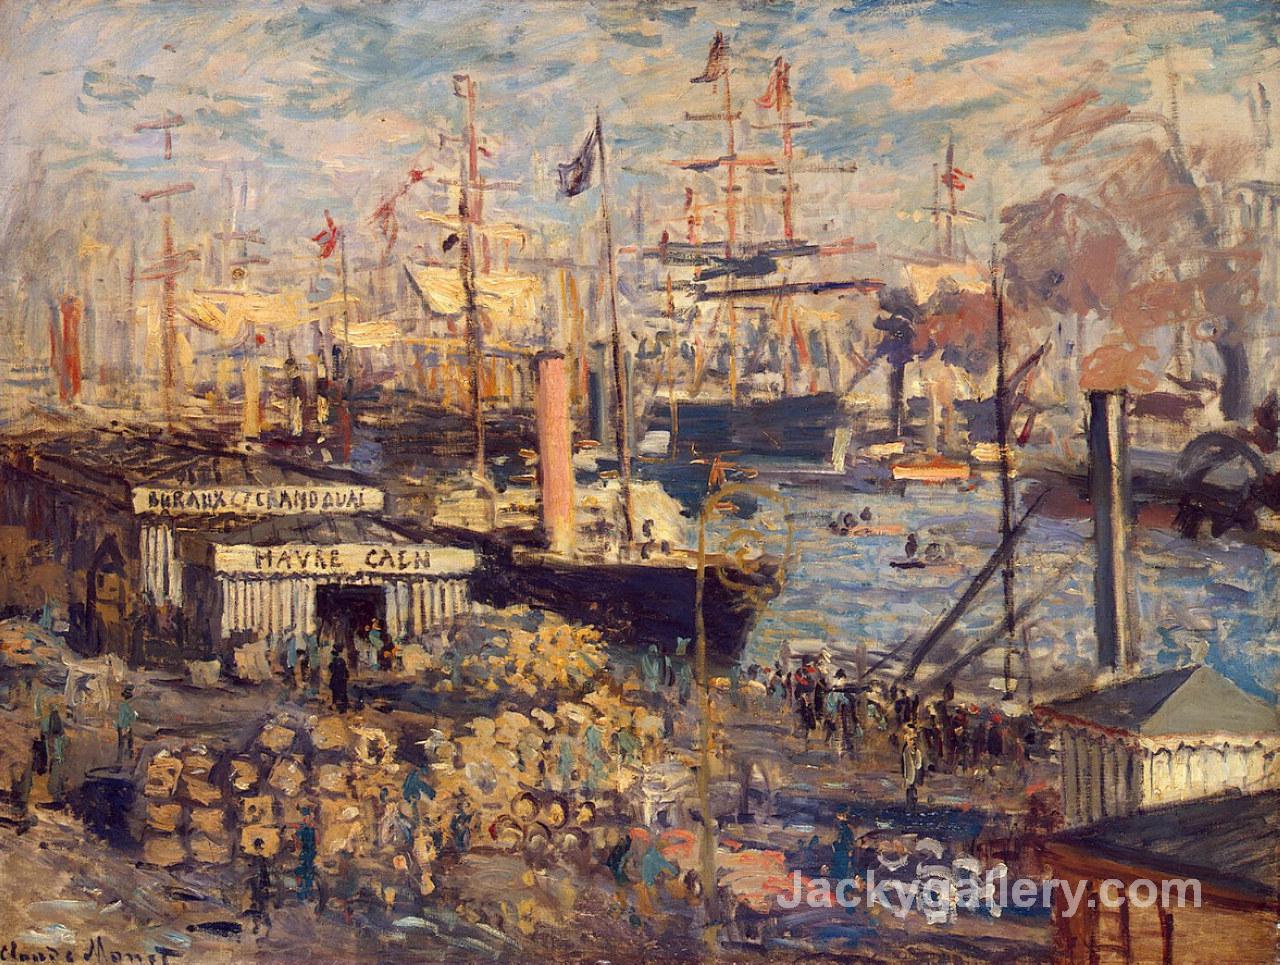 The Grand Dock at Le Havre by Claude Monet paintings reproduction